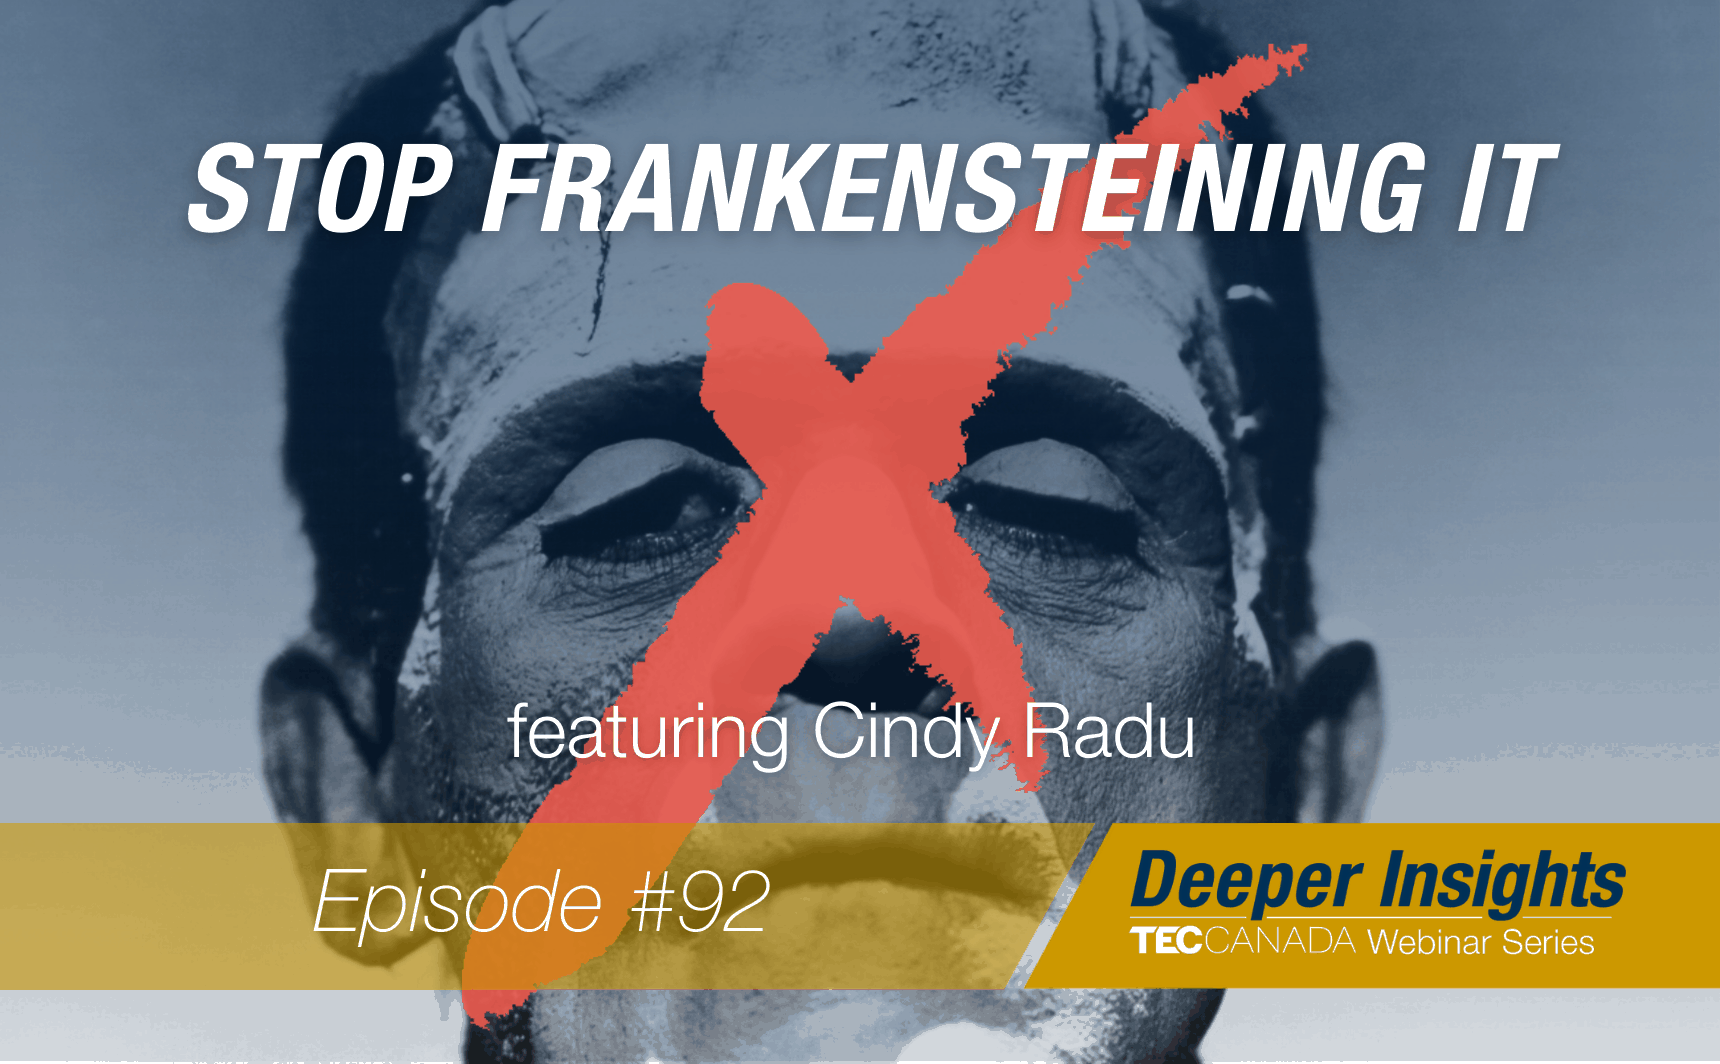 Preparing for Wealth Transfer and Transition Planning? Don’t “Frankenstein” It!